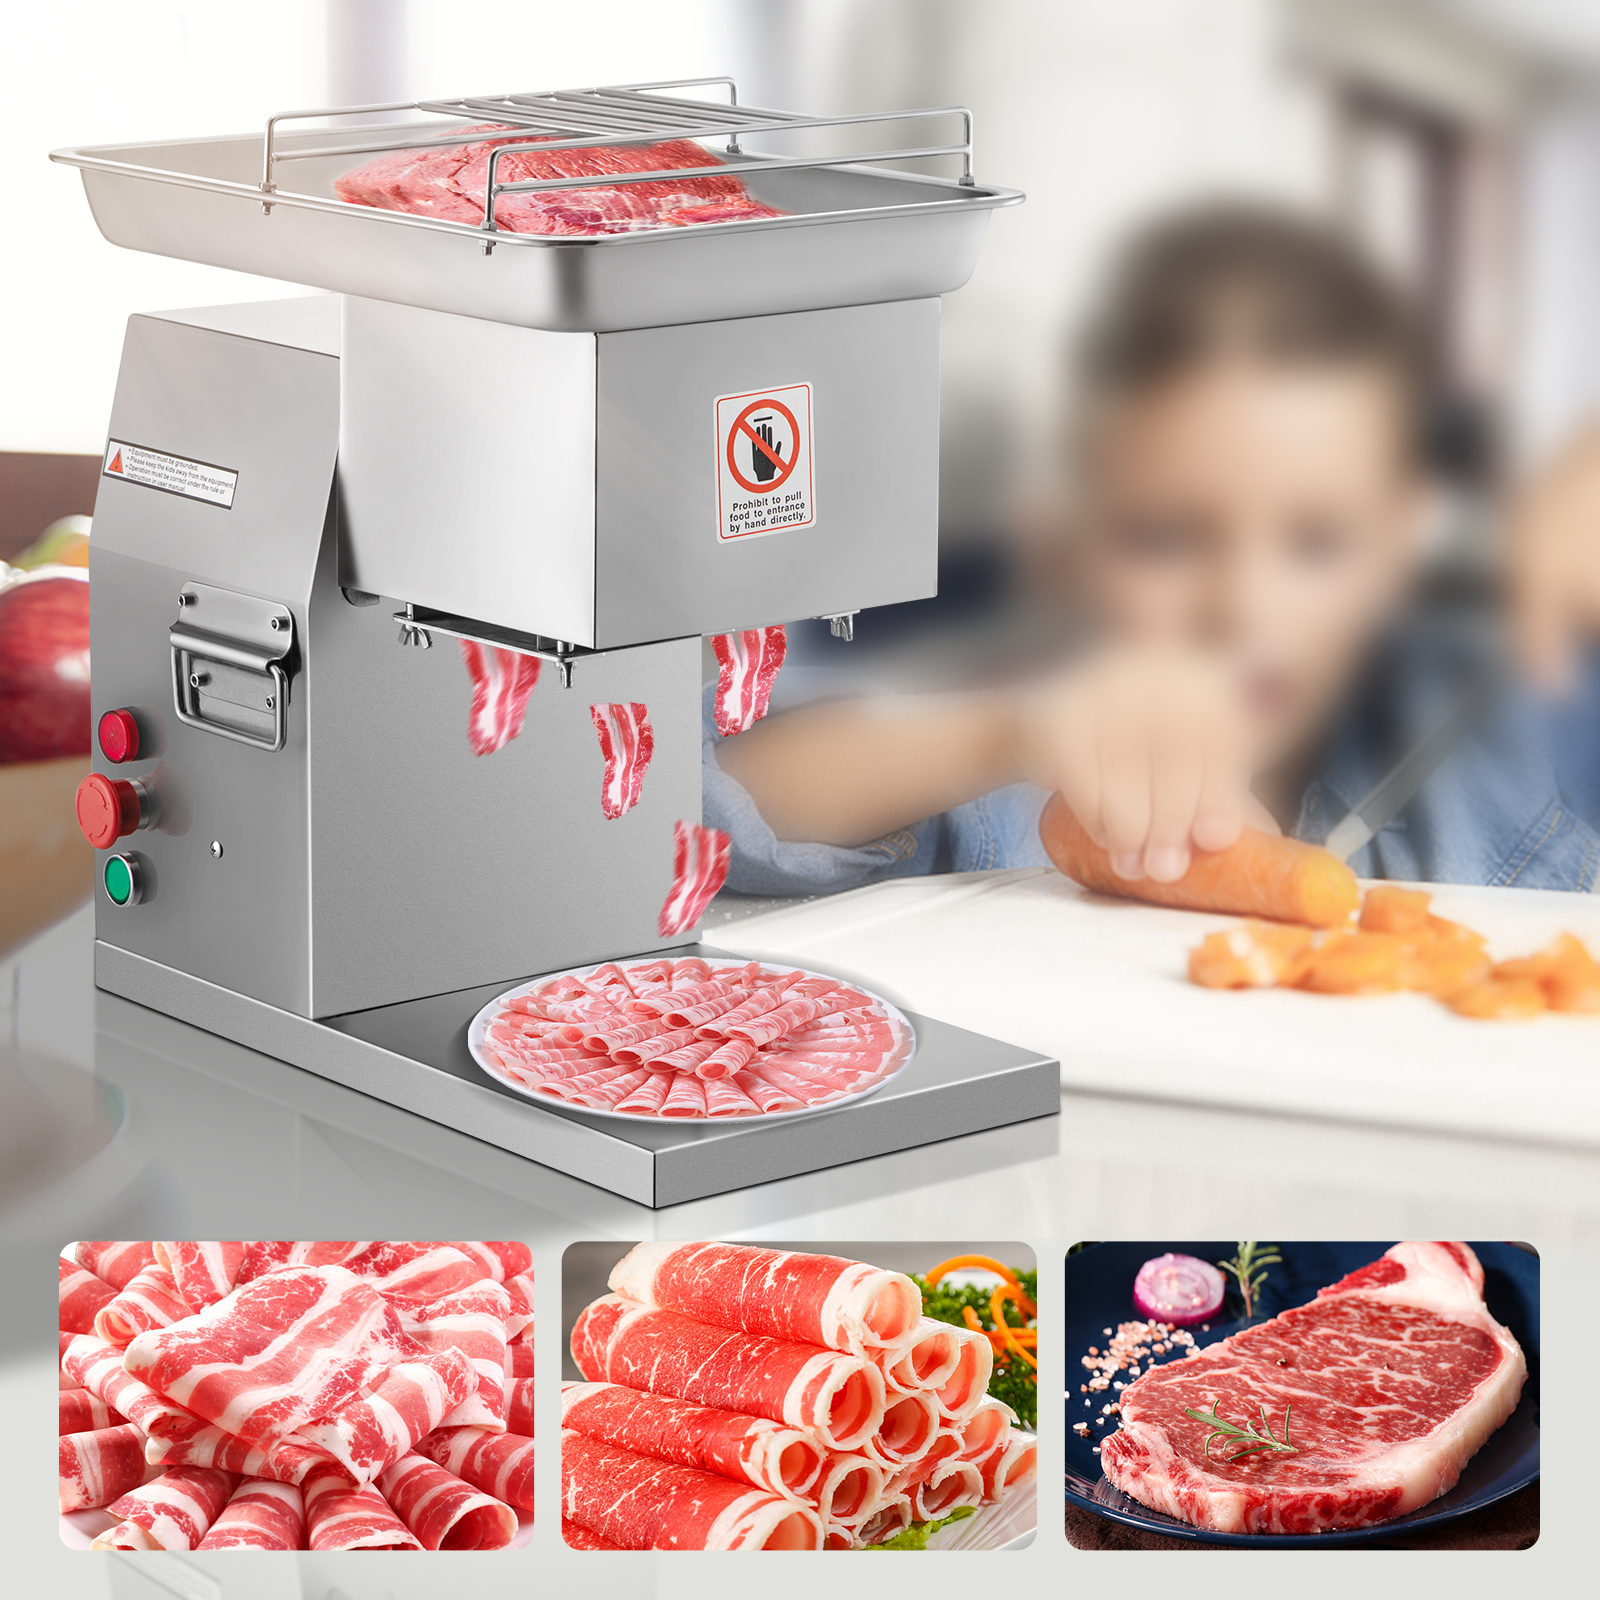 Manual Electric Meat Slicer Commercial Cutter Meat Fully Automatic  Multifunction Vegetable Slicer Cutting Machine